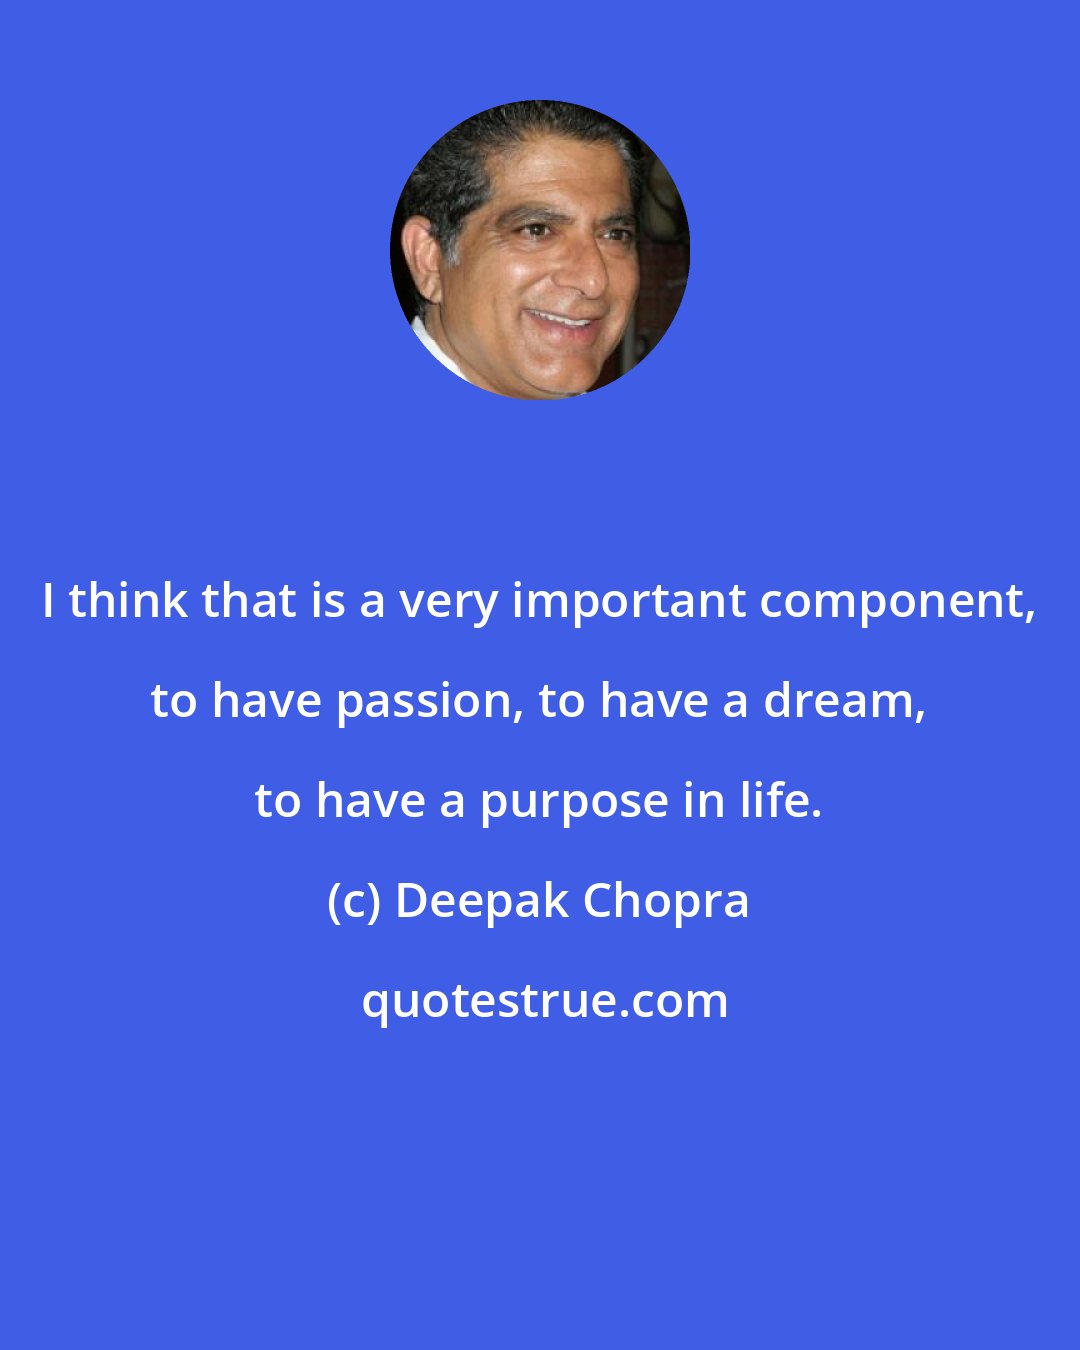 Deepak Chopra: I think that is a very important component, to have passion, to have a dream, to have a purpose in life.